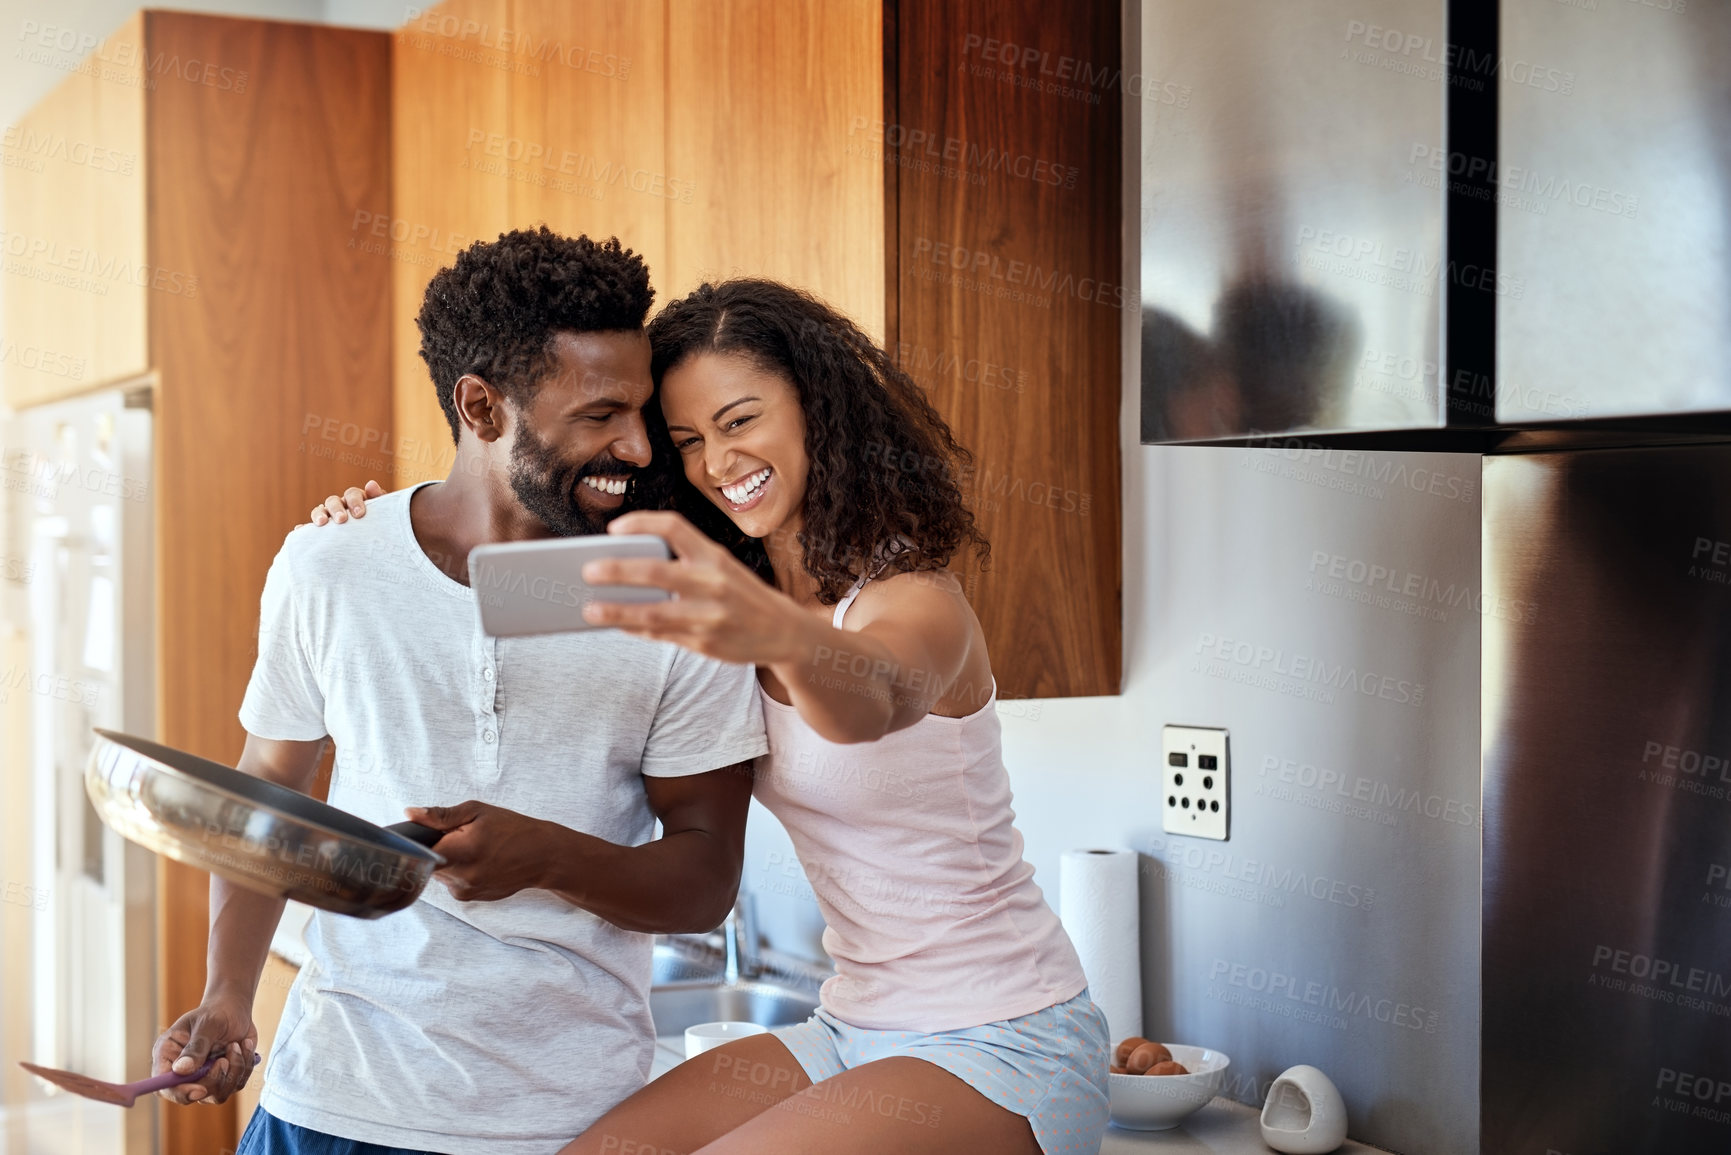 Buy stock photo Cropped shot of an attractive young woman taking selfies of herself and her husband while he cooks in the kitchen